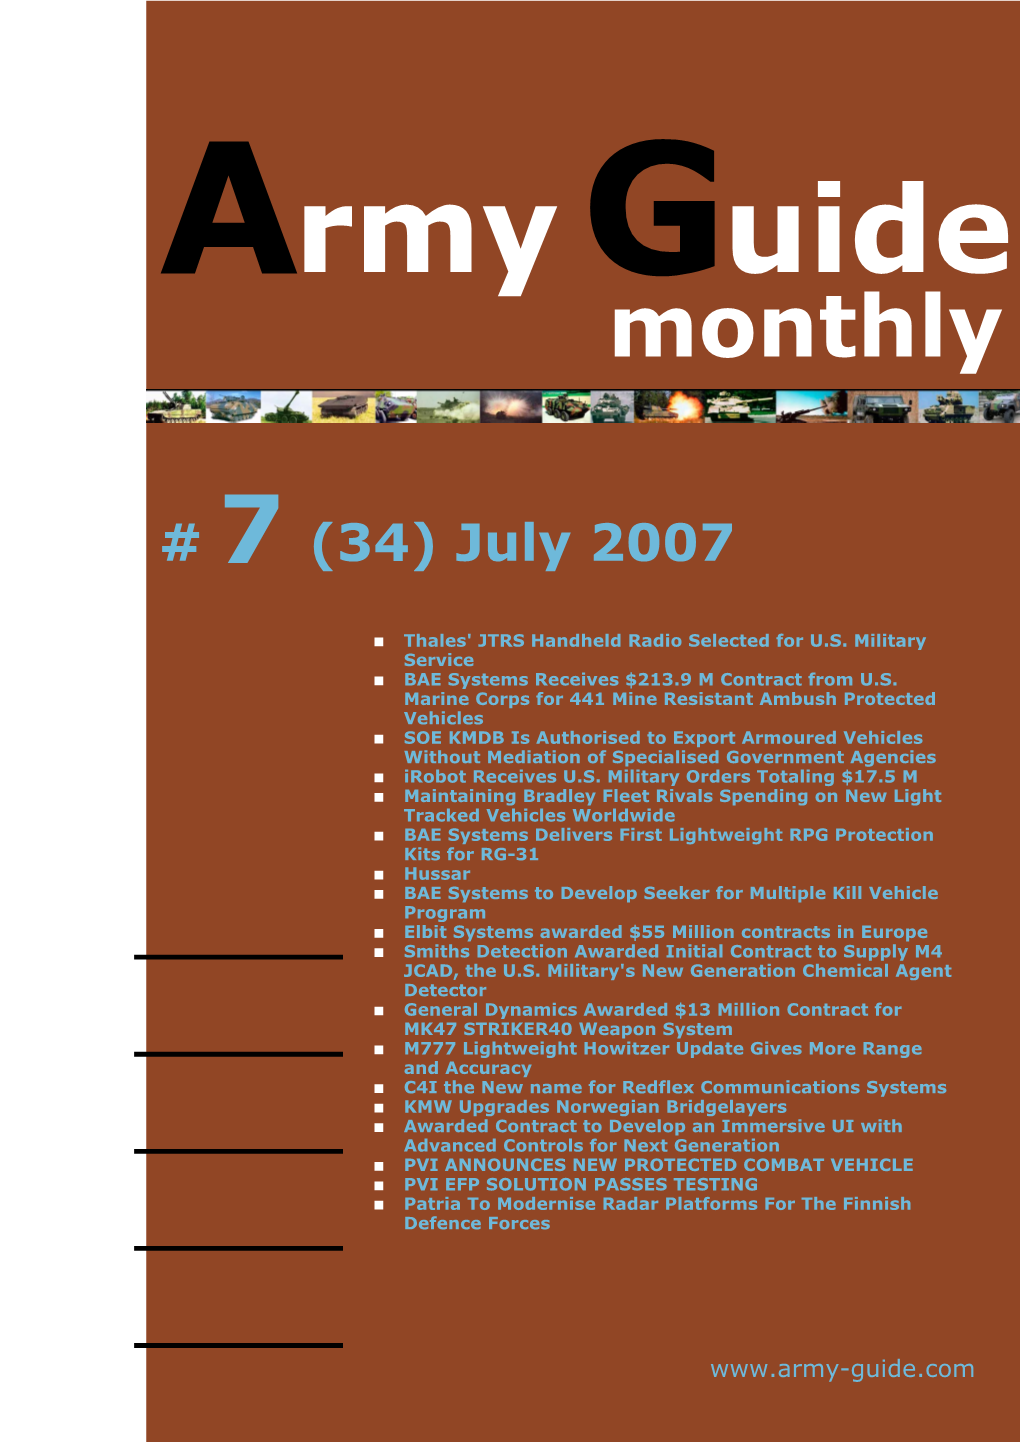 Army Guide Monthly • Issue #7 (34)